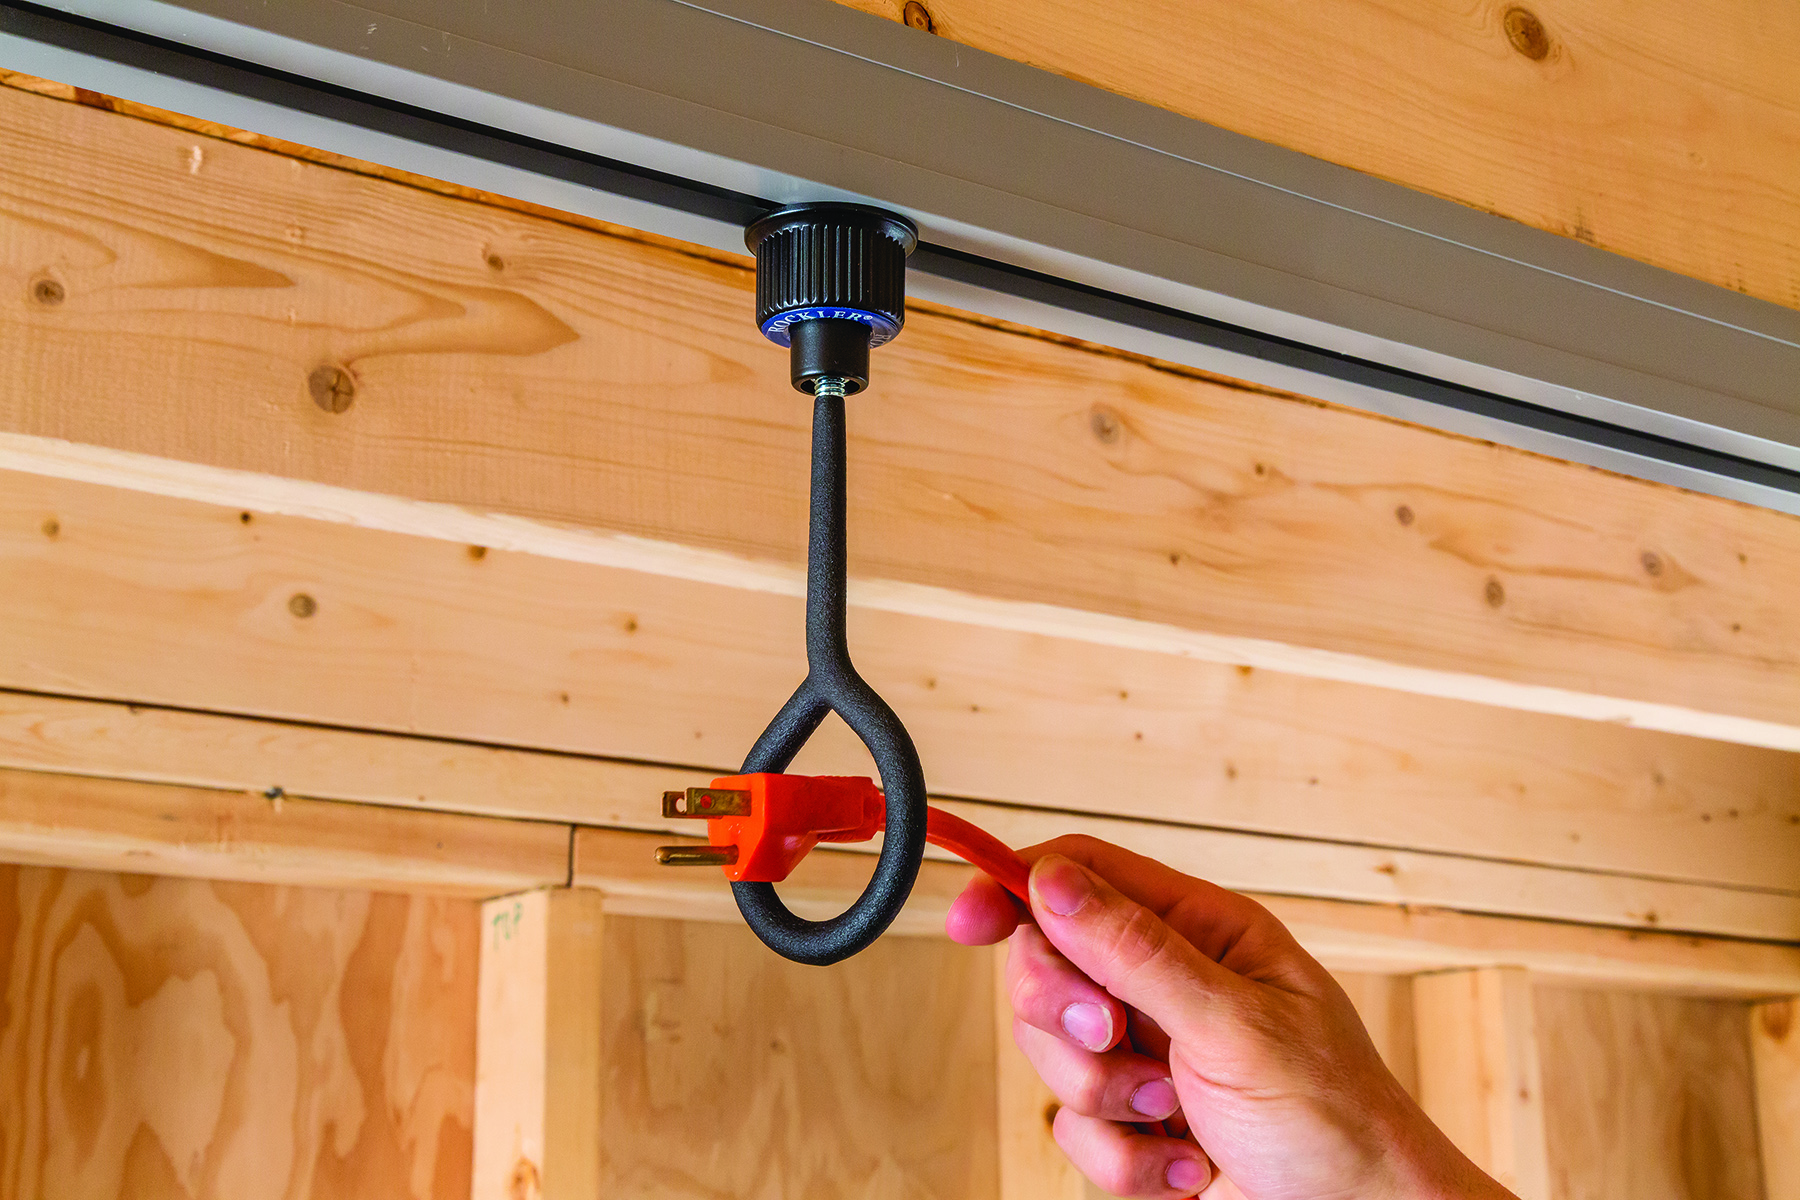 Rockler Ceiling Track attachments include a 1-1/2" inside-diameter ring hook that fits power cords and air hoses.